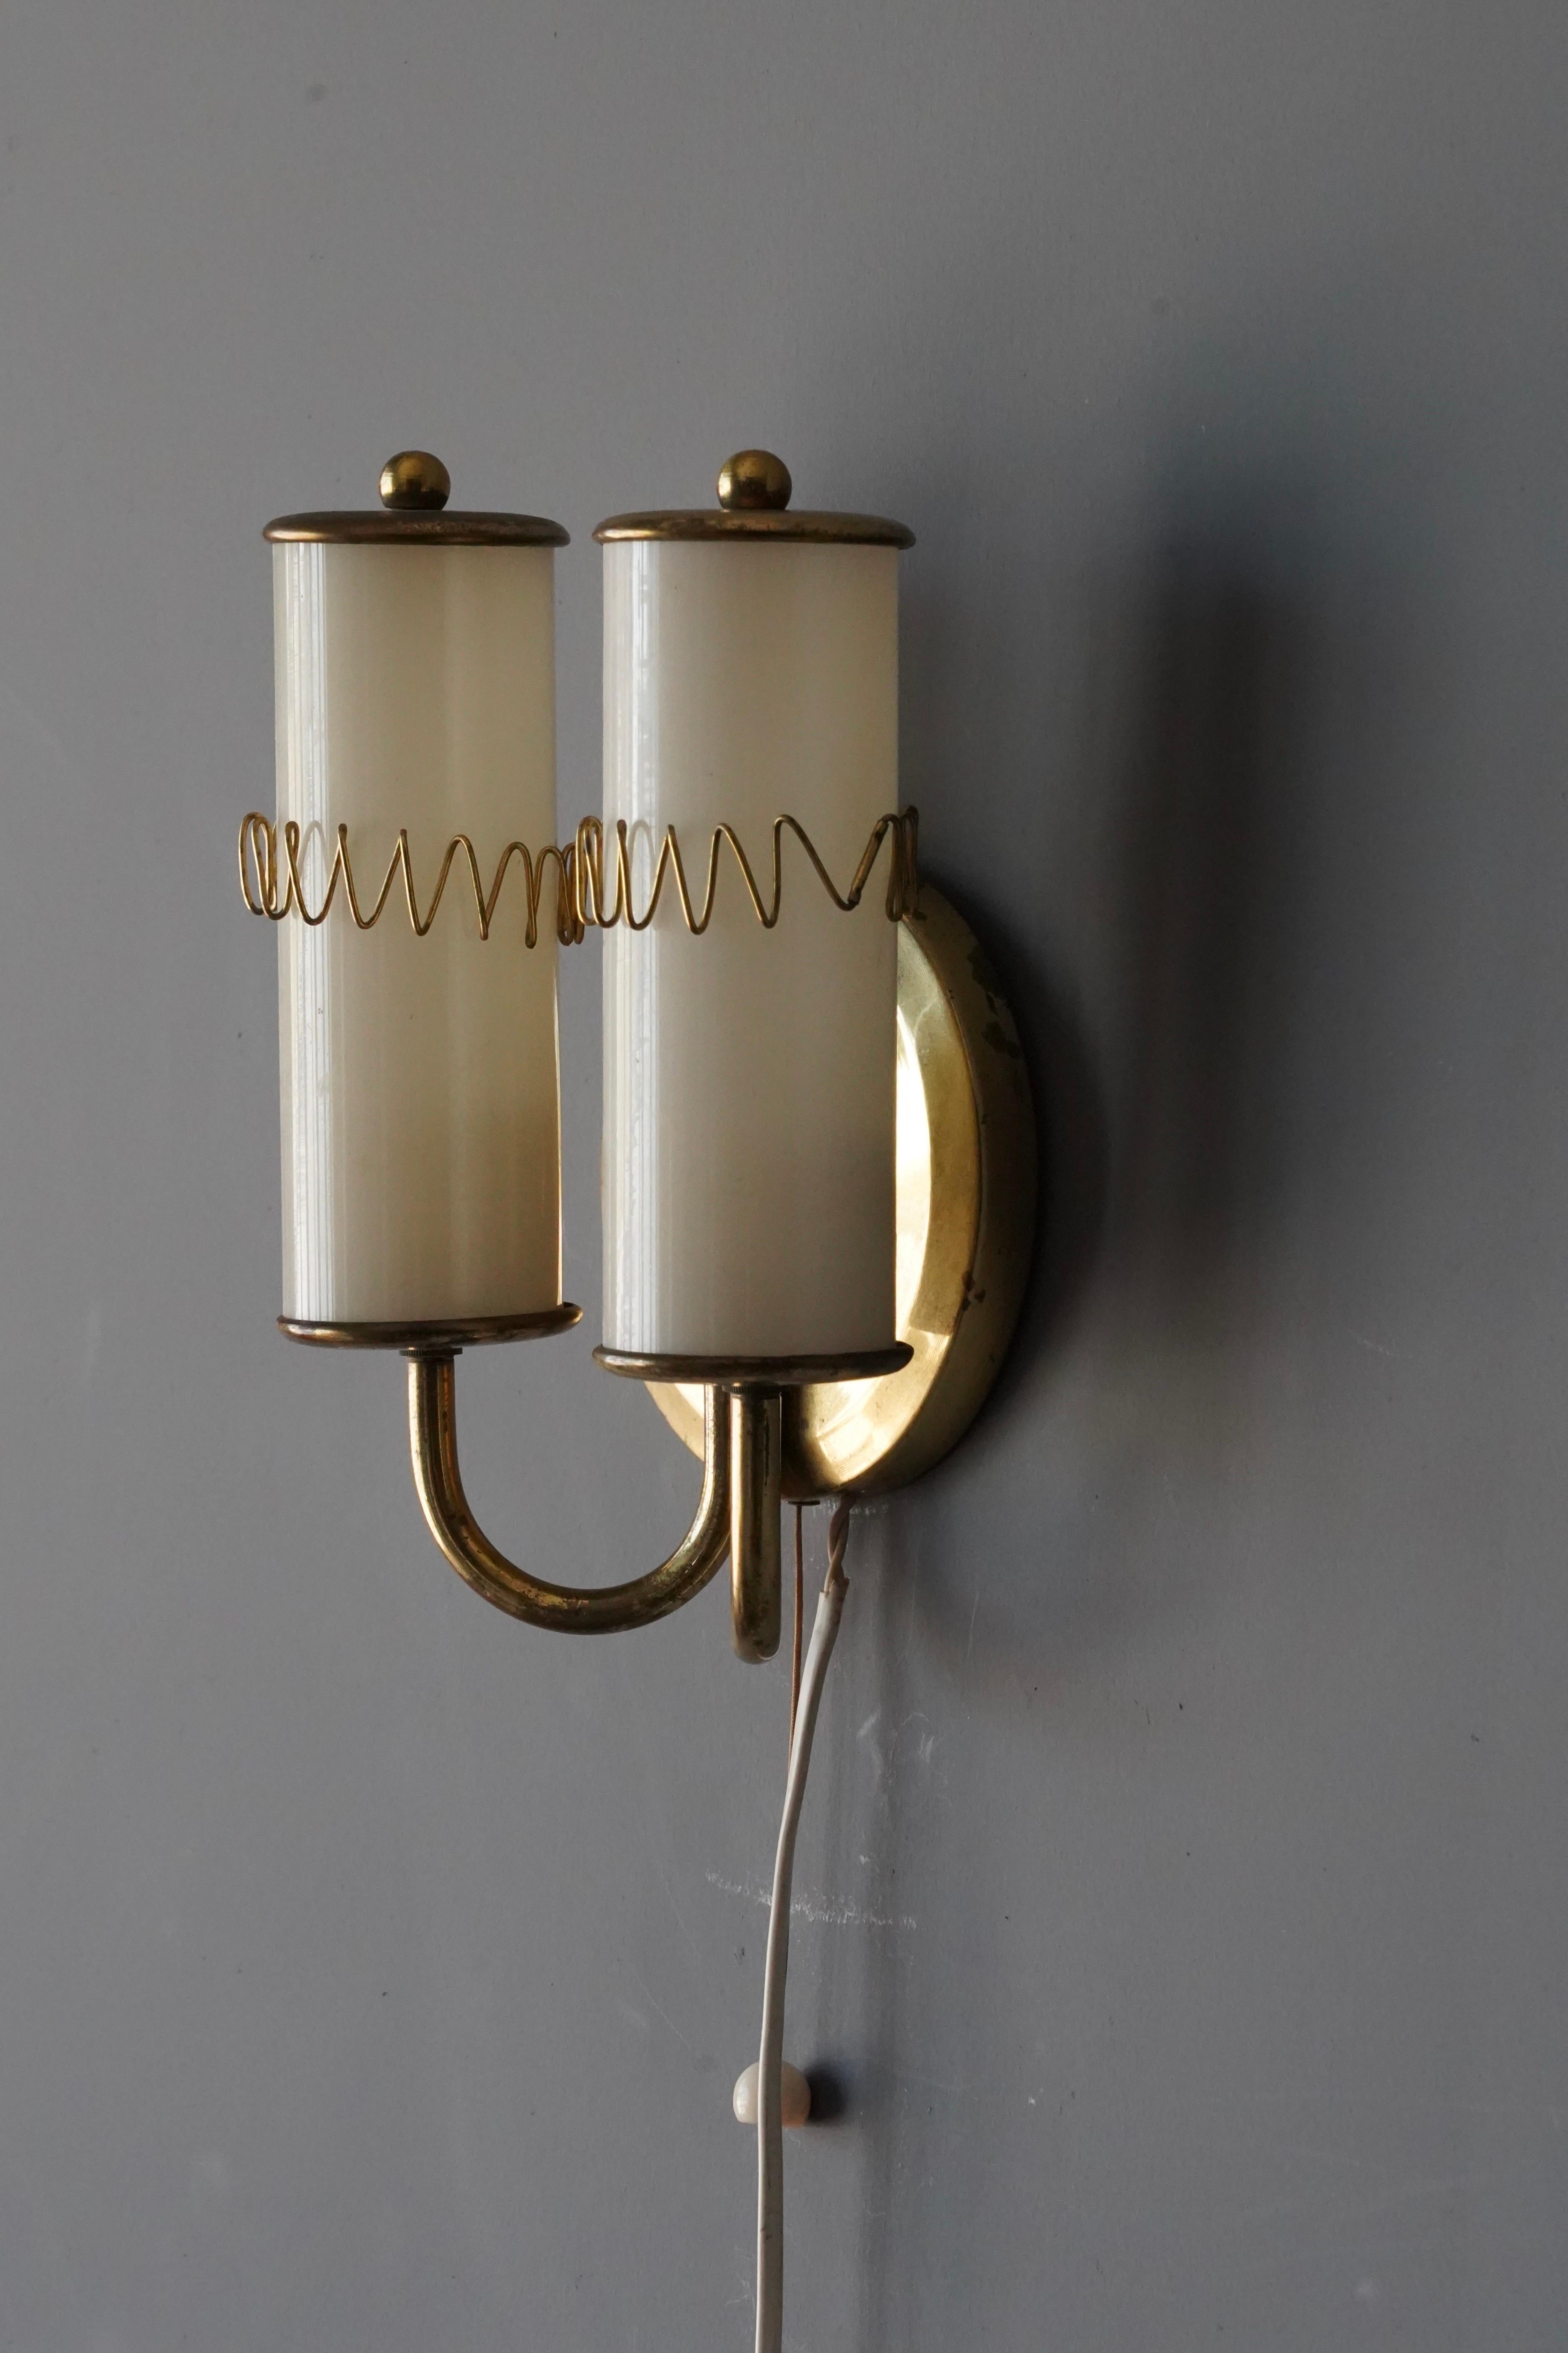 Mid-20th Century Swedish, Two-Armed Wall Light, Brass, Milk Glass, Sweden, 1950s